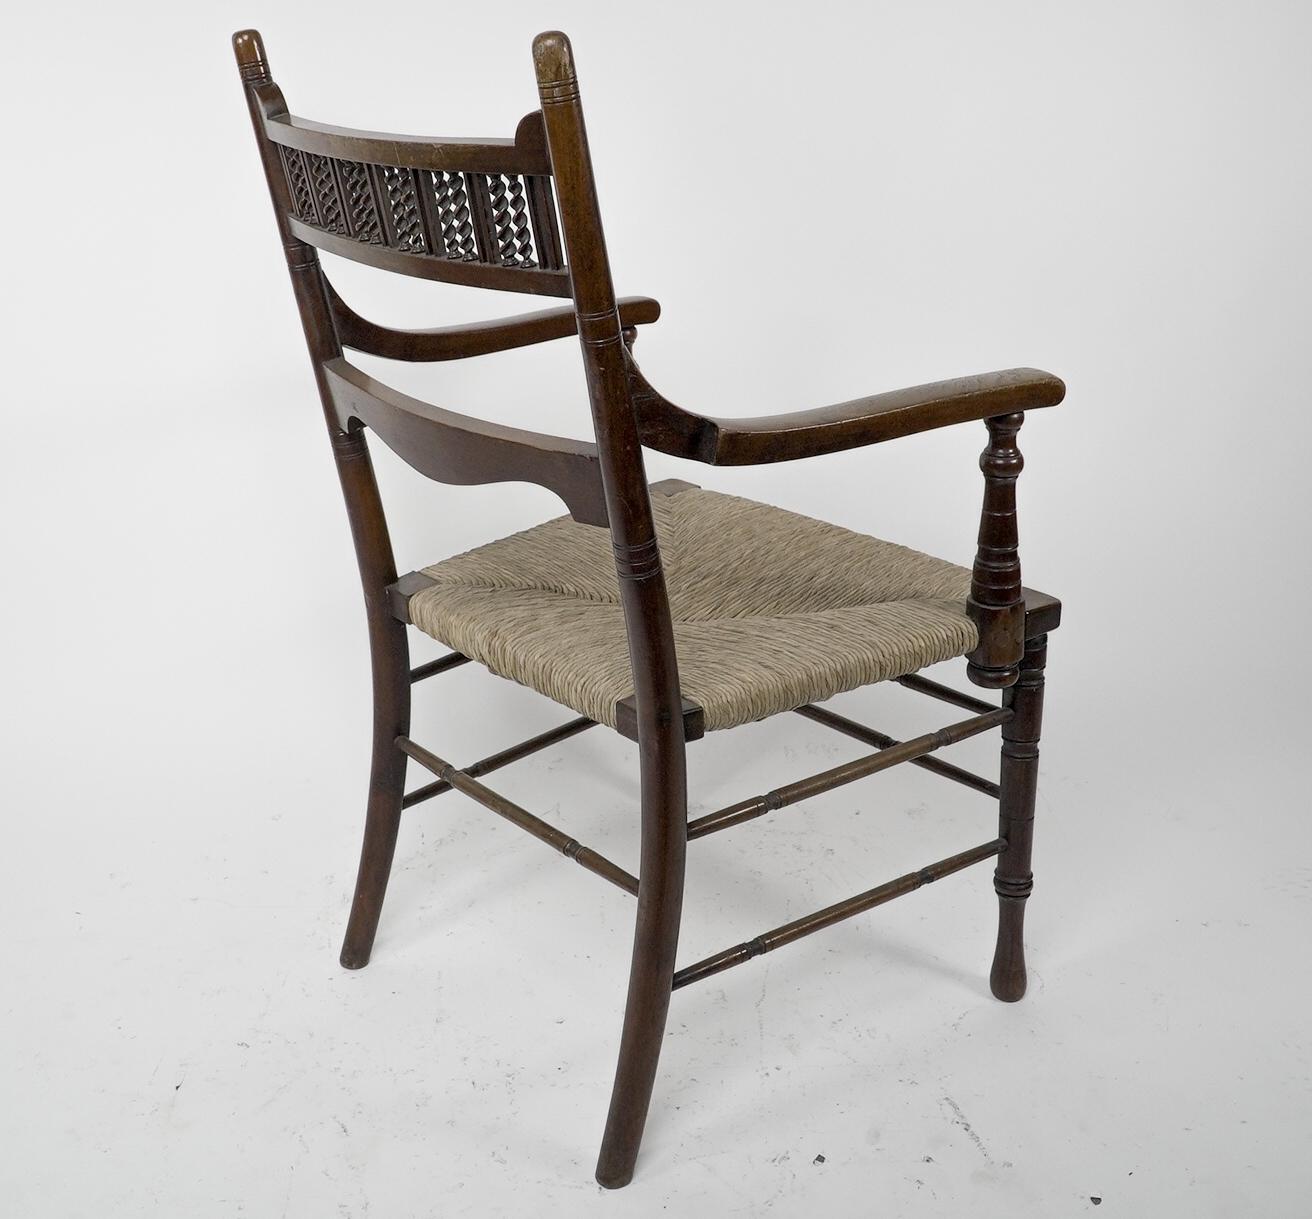 George Bell & George Freeth Roper Aesthetic Movement Walnut rush seat armchair. For Sale 2